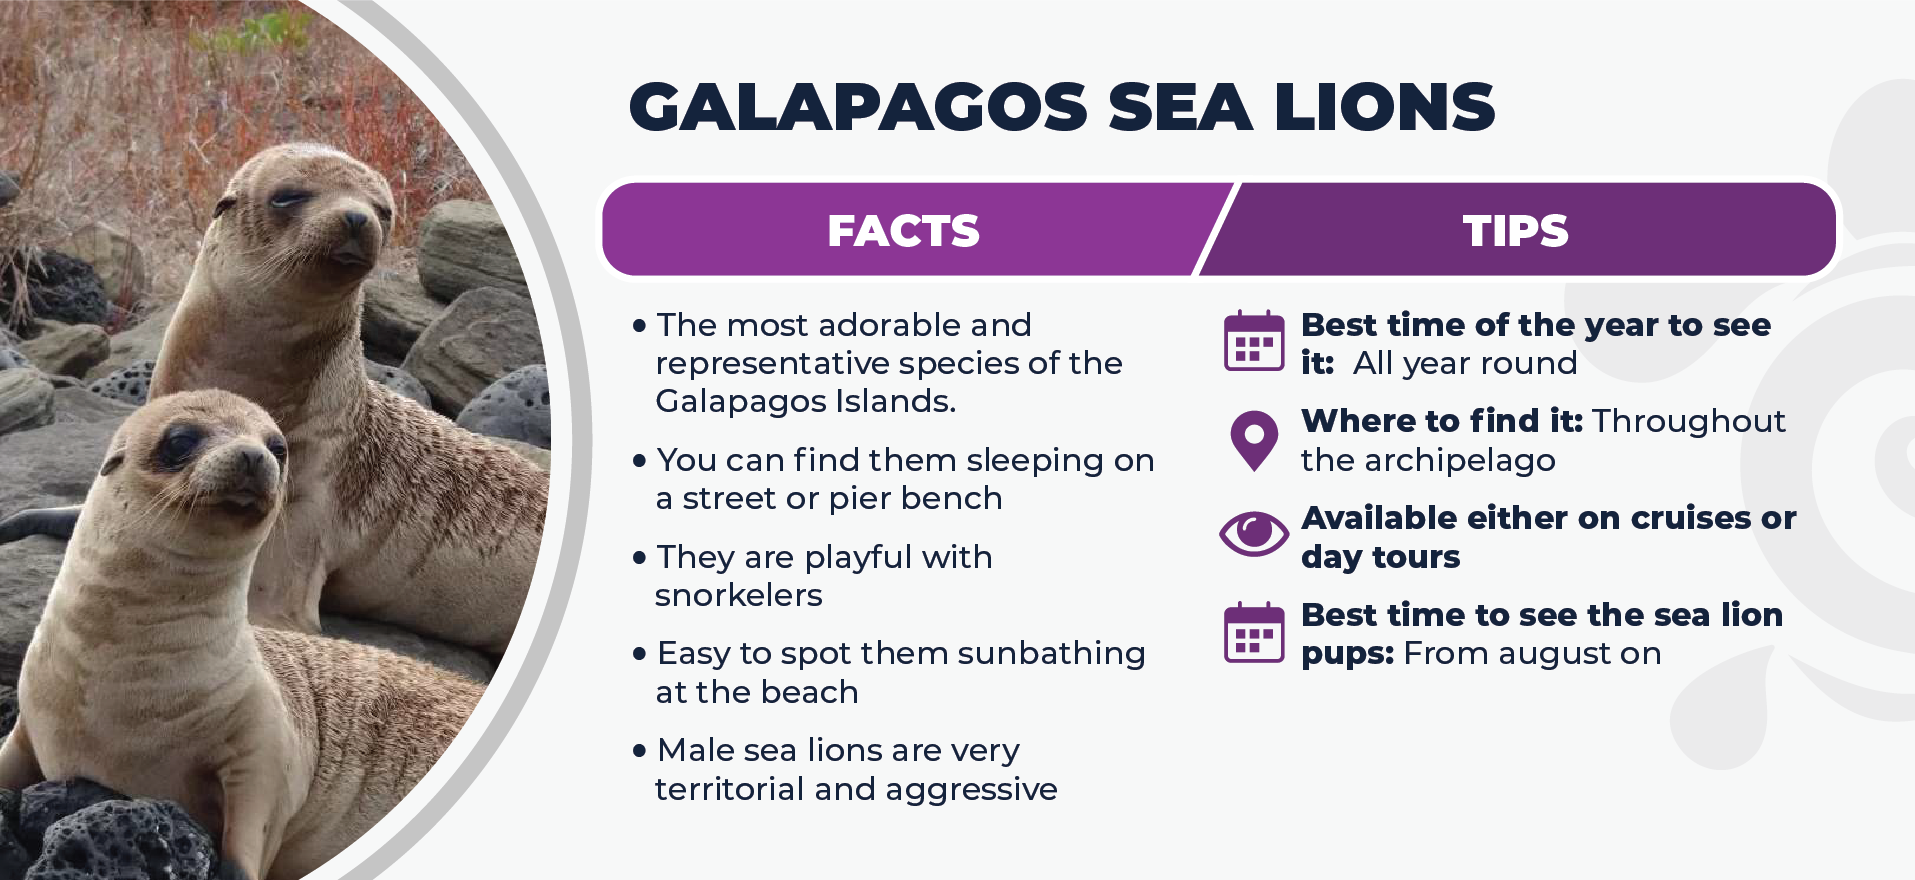 Galapagos Sea Lions Facts